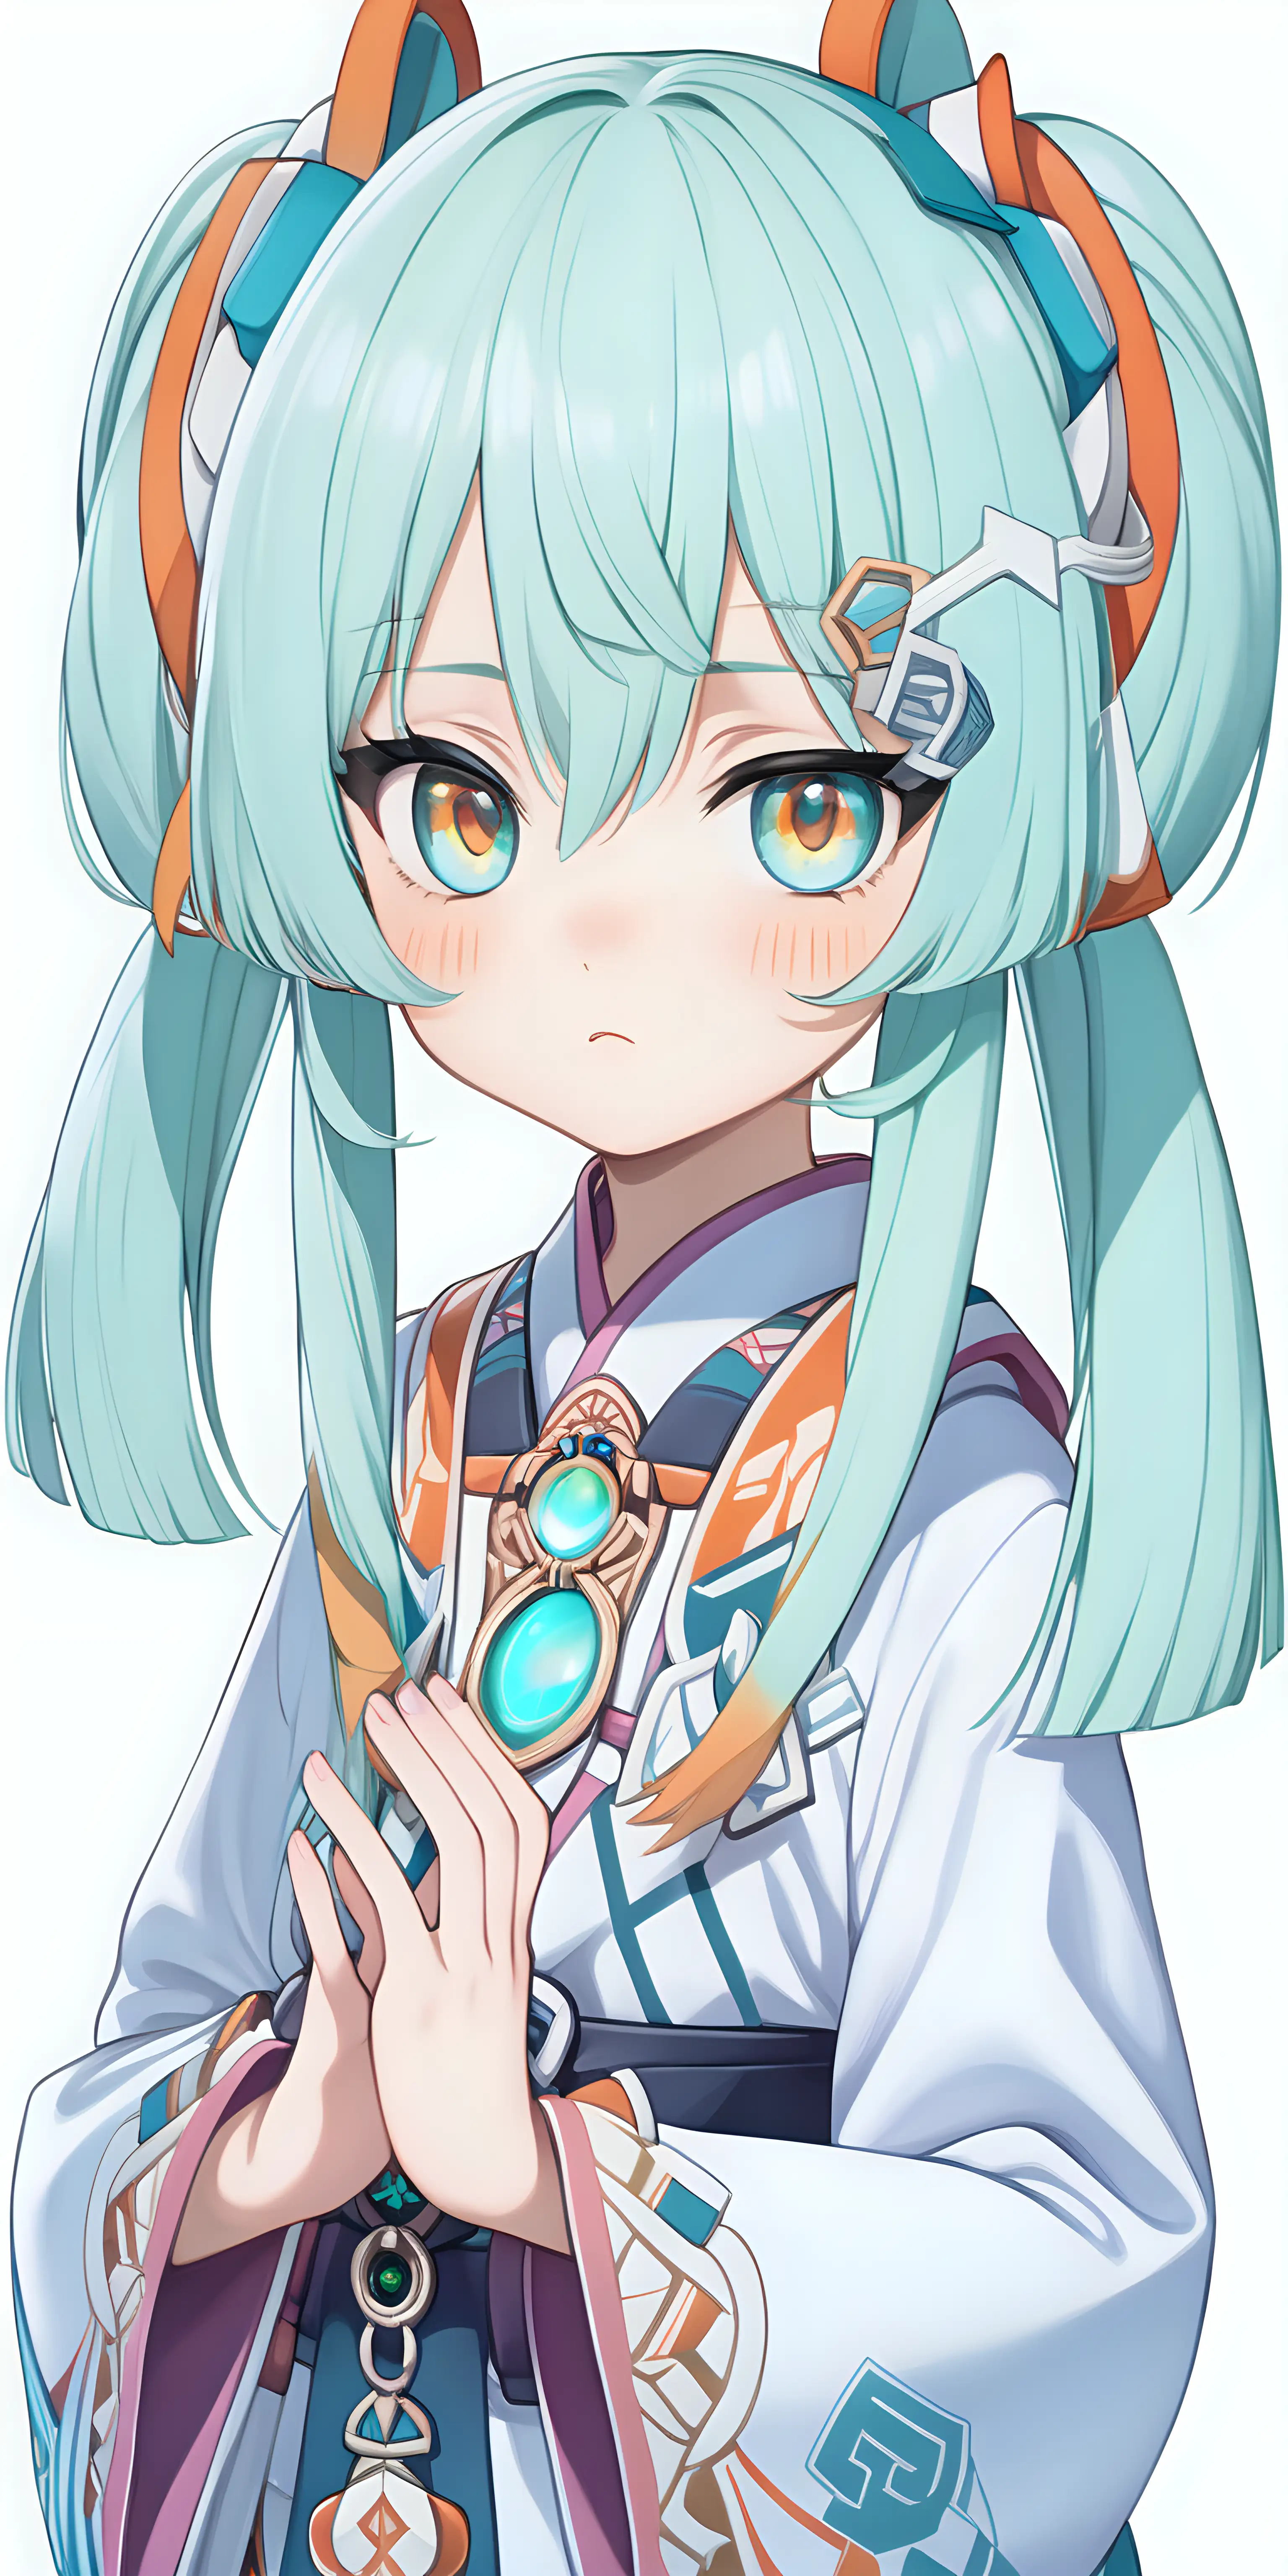 Vtuber Head character sheet design facing the front side. Cute anime girl with white hair on the sides and a twin pony tail. Cute Eyes shape ovoid with ovoid green pupils with complex pattern inside of cyan and orange colours mixed. And is portrayed as an Anime Pure Cute Brat, embodying the essence of a divine being. The character is designed with a focus on purity and cuteness, reflecting the anime aesthetic. Her outfit is a crucial aspect, featuring sacred holistic attire that symbolizes her connection to the divine. The clothing is adorned with intricate details and symbols representing knowledge, life, and Gnosis. The use of vibrant colours and unique styling adds a visually appealing dimension to the character.